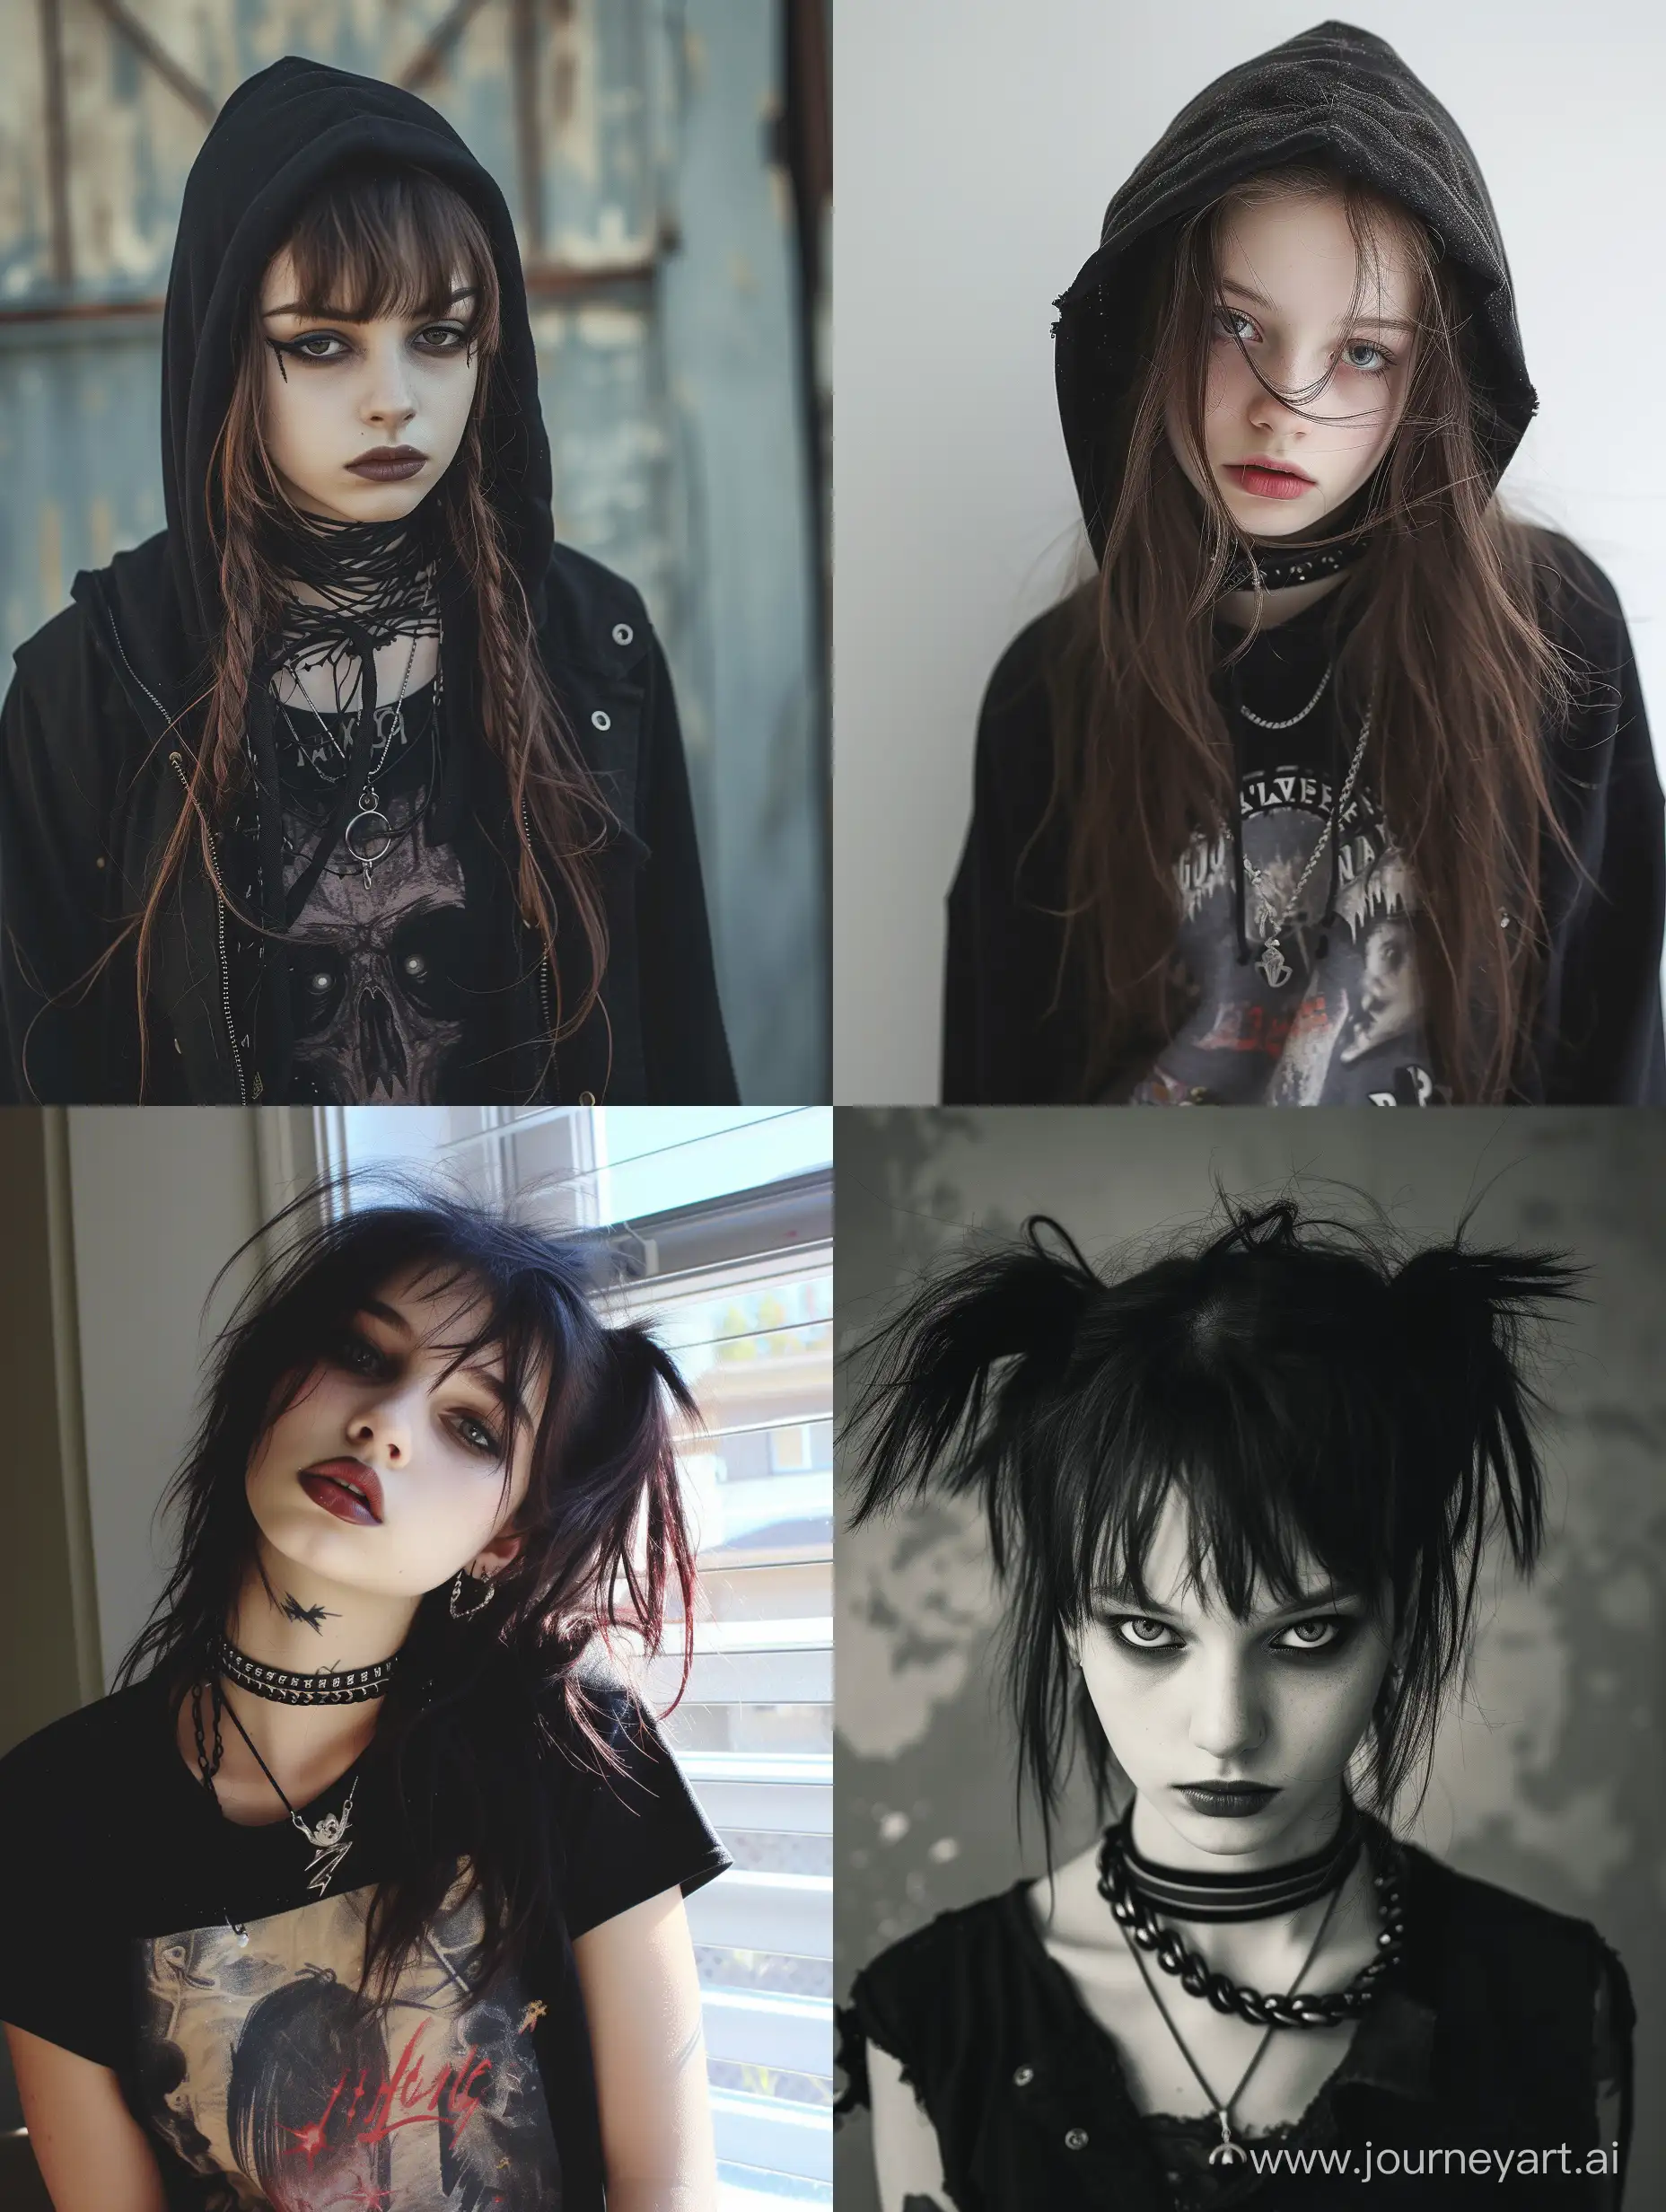 Gothic-Rap-Teenage-Girl-Expressing-Individuality-in-a-34-Aspect-Ratio